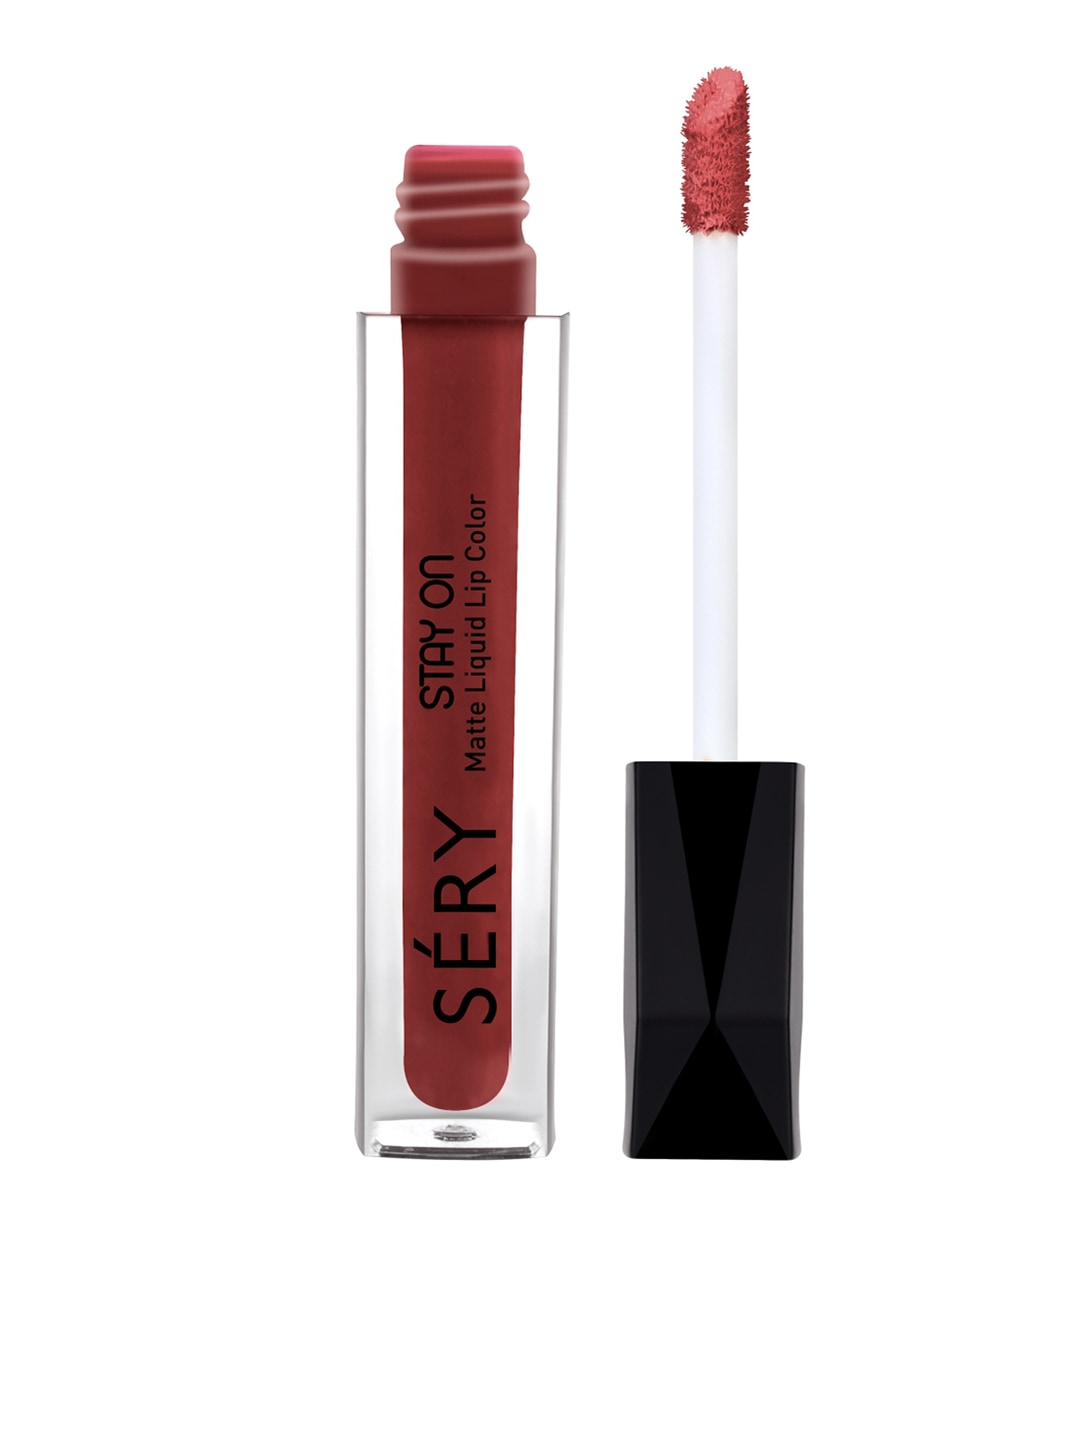 SERY Stay On Liquid Matte Lip Color-Call Me Chocolate LSO-08 Price in India